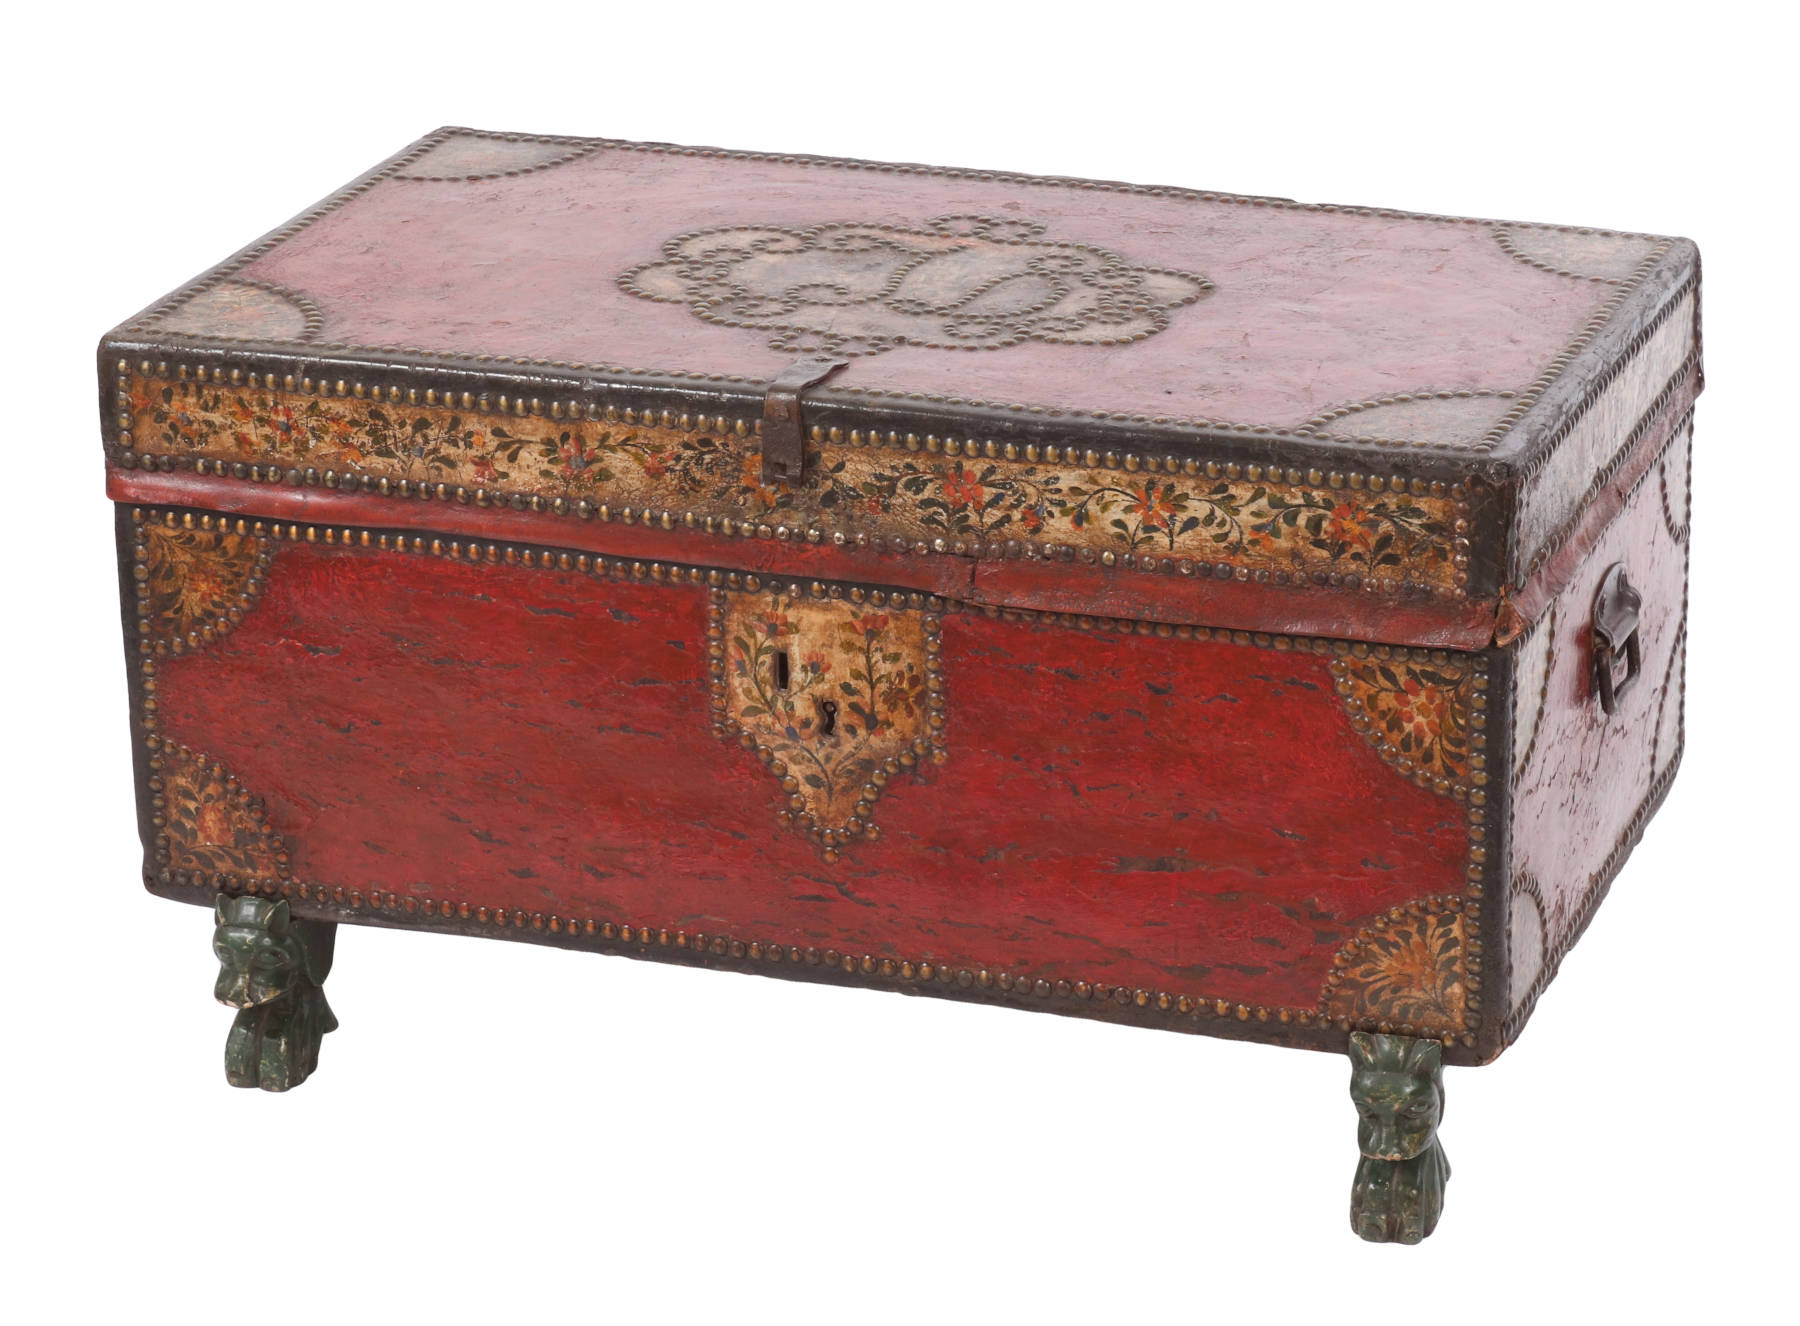 Chinese Export Leather Trunk, c. 1820